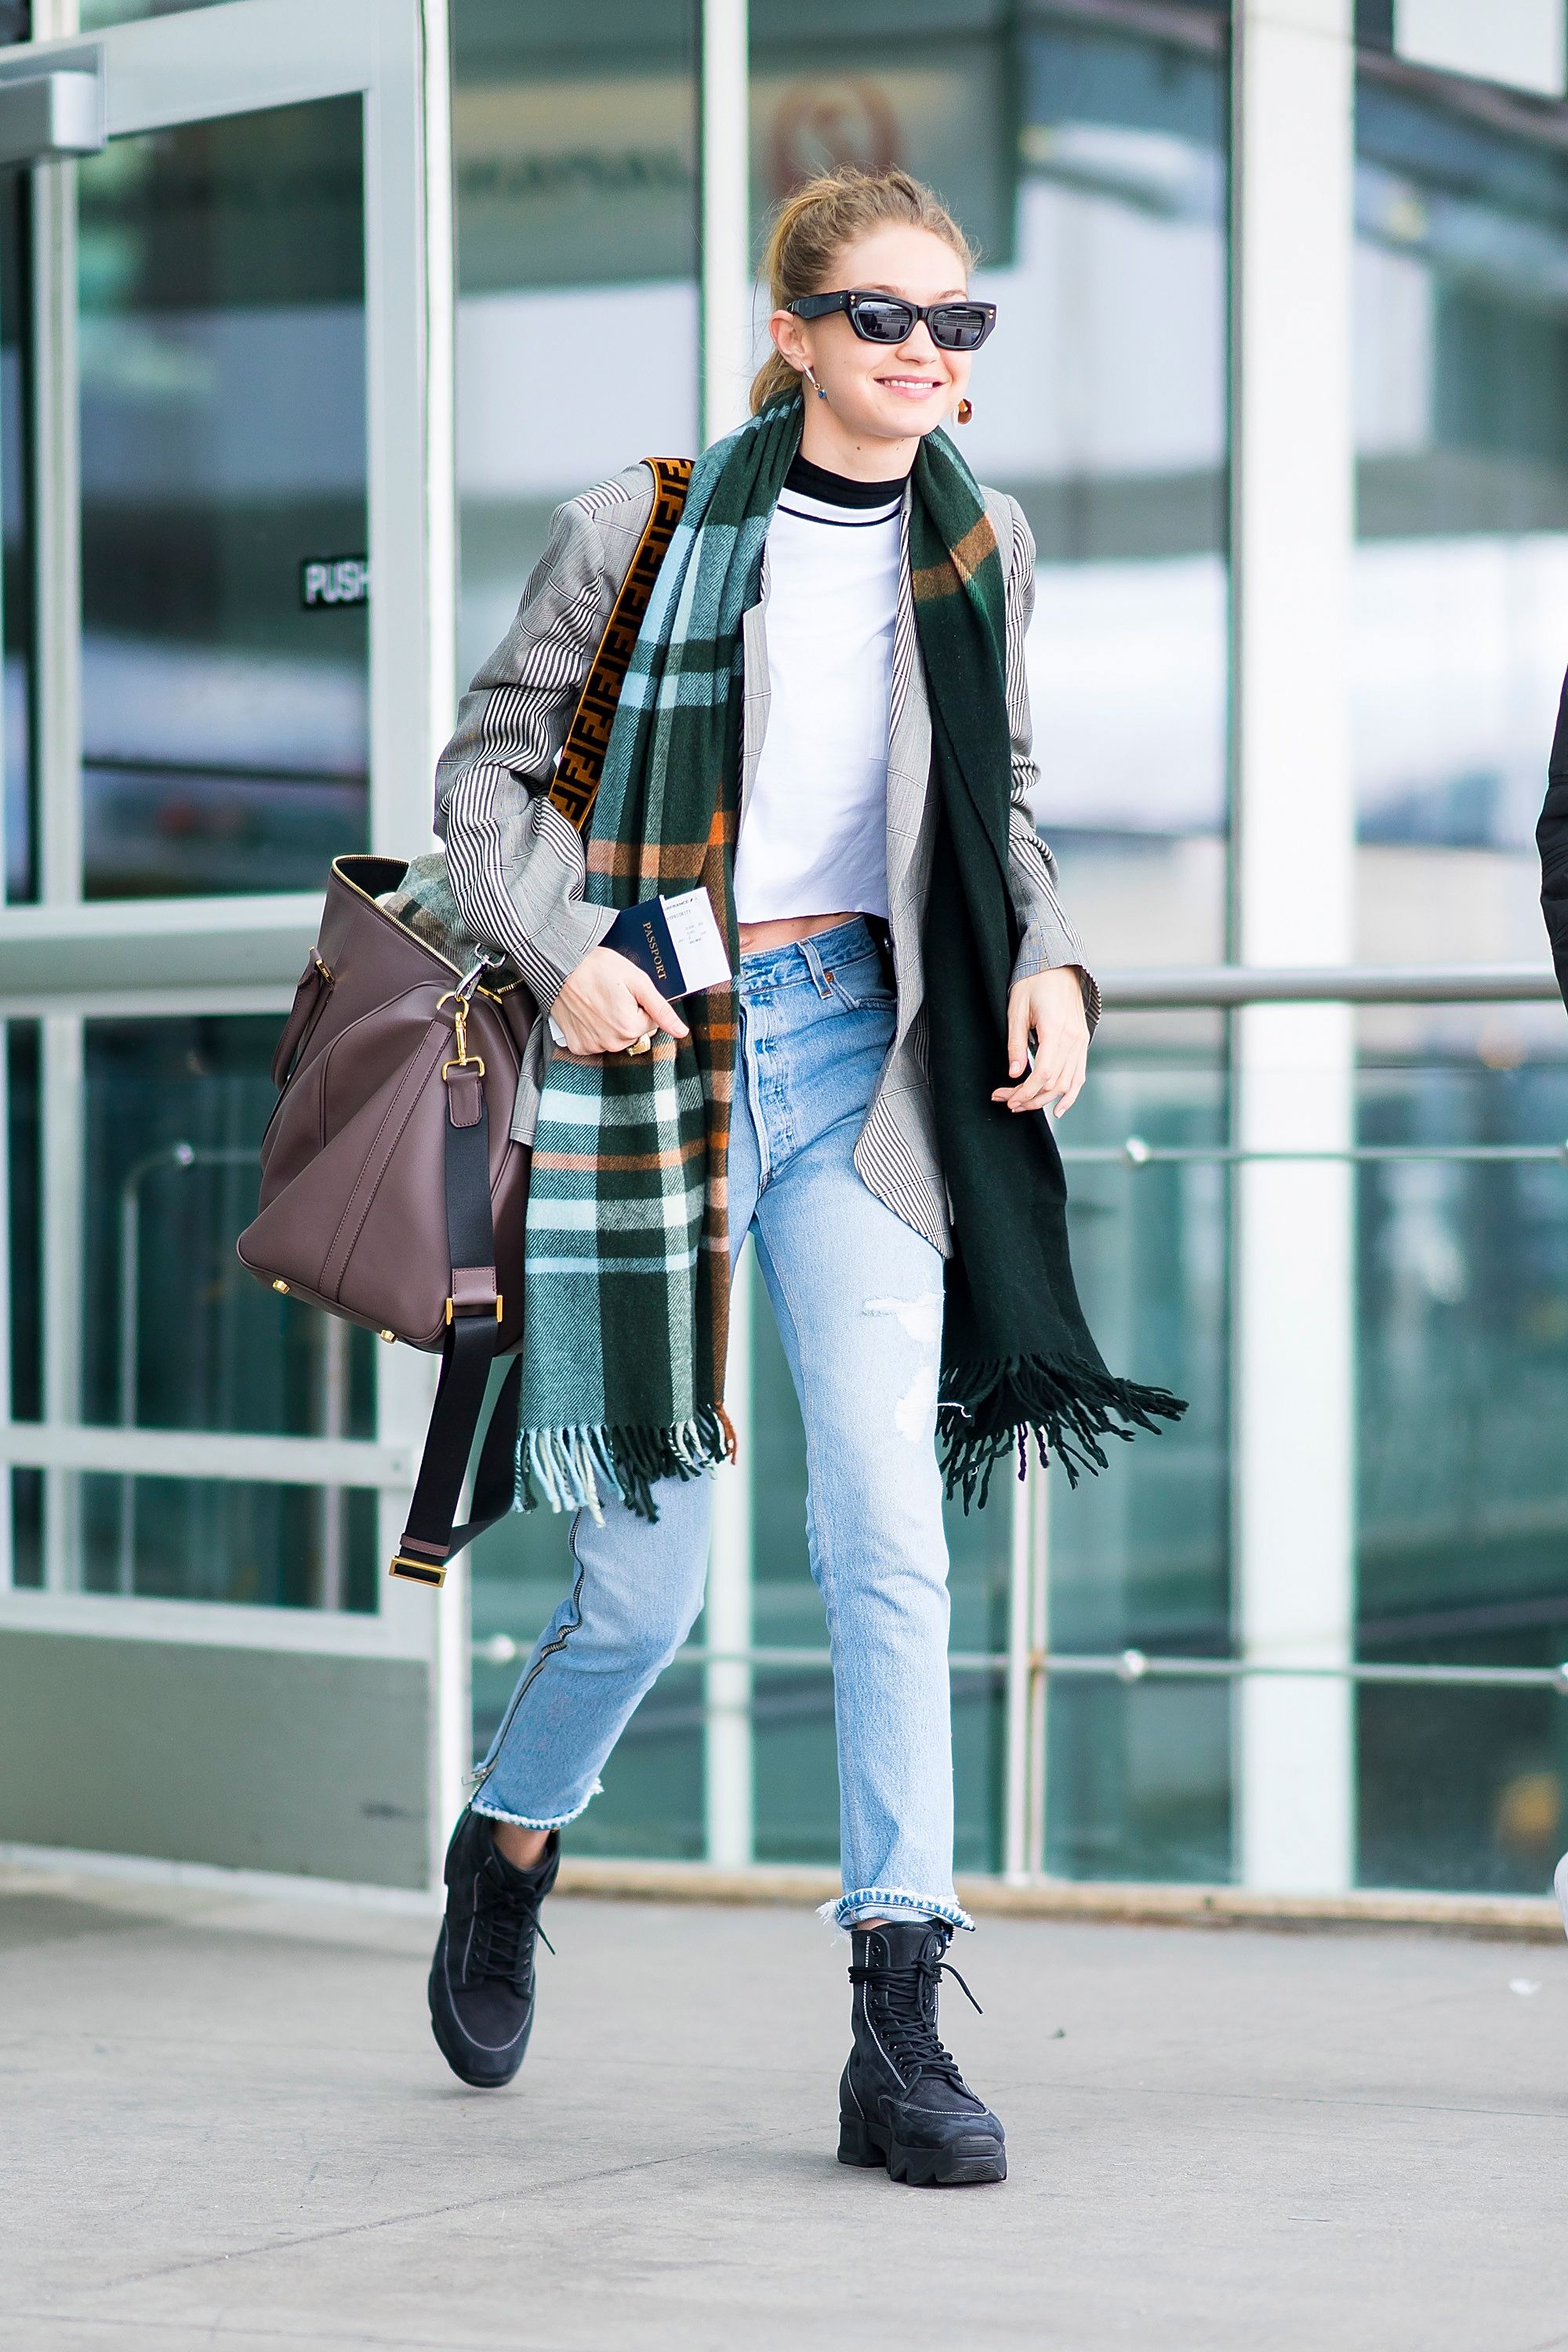 The 5 Most Surprising Items Celebs Have Ever Worn to the Airport